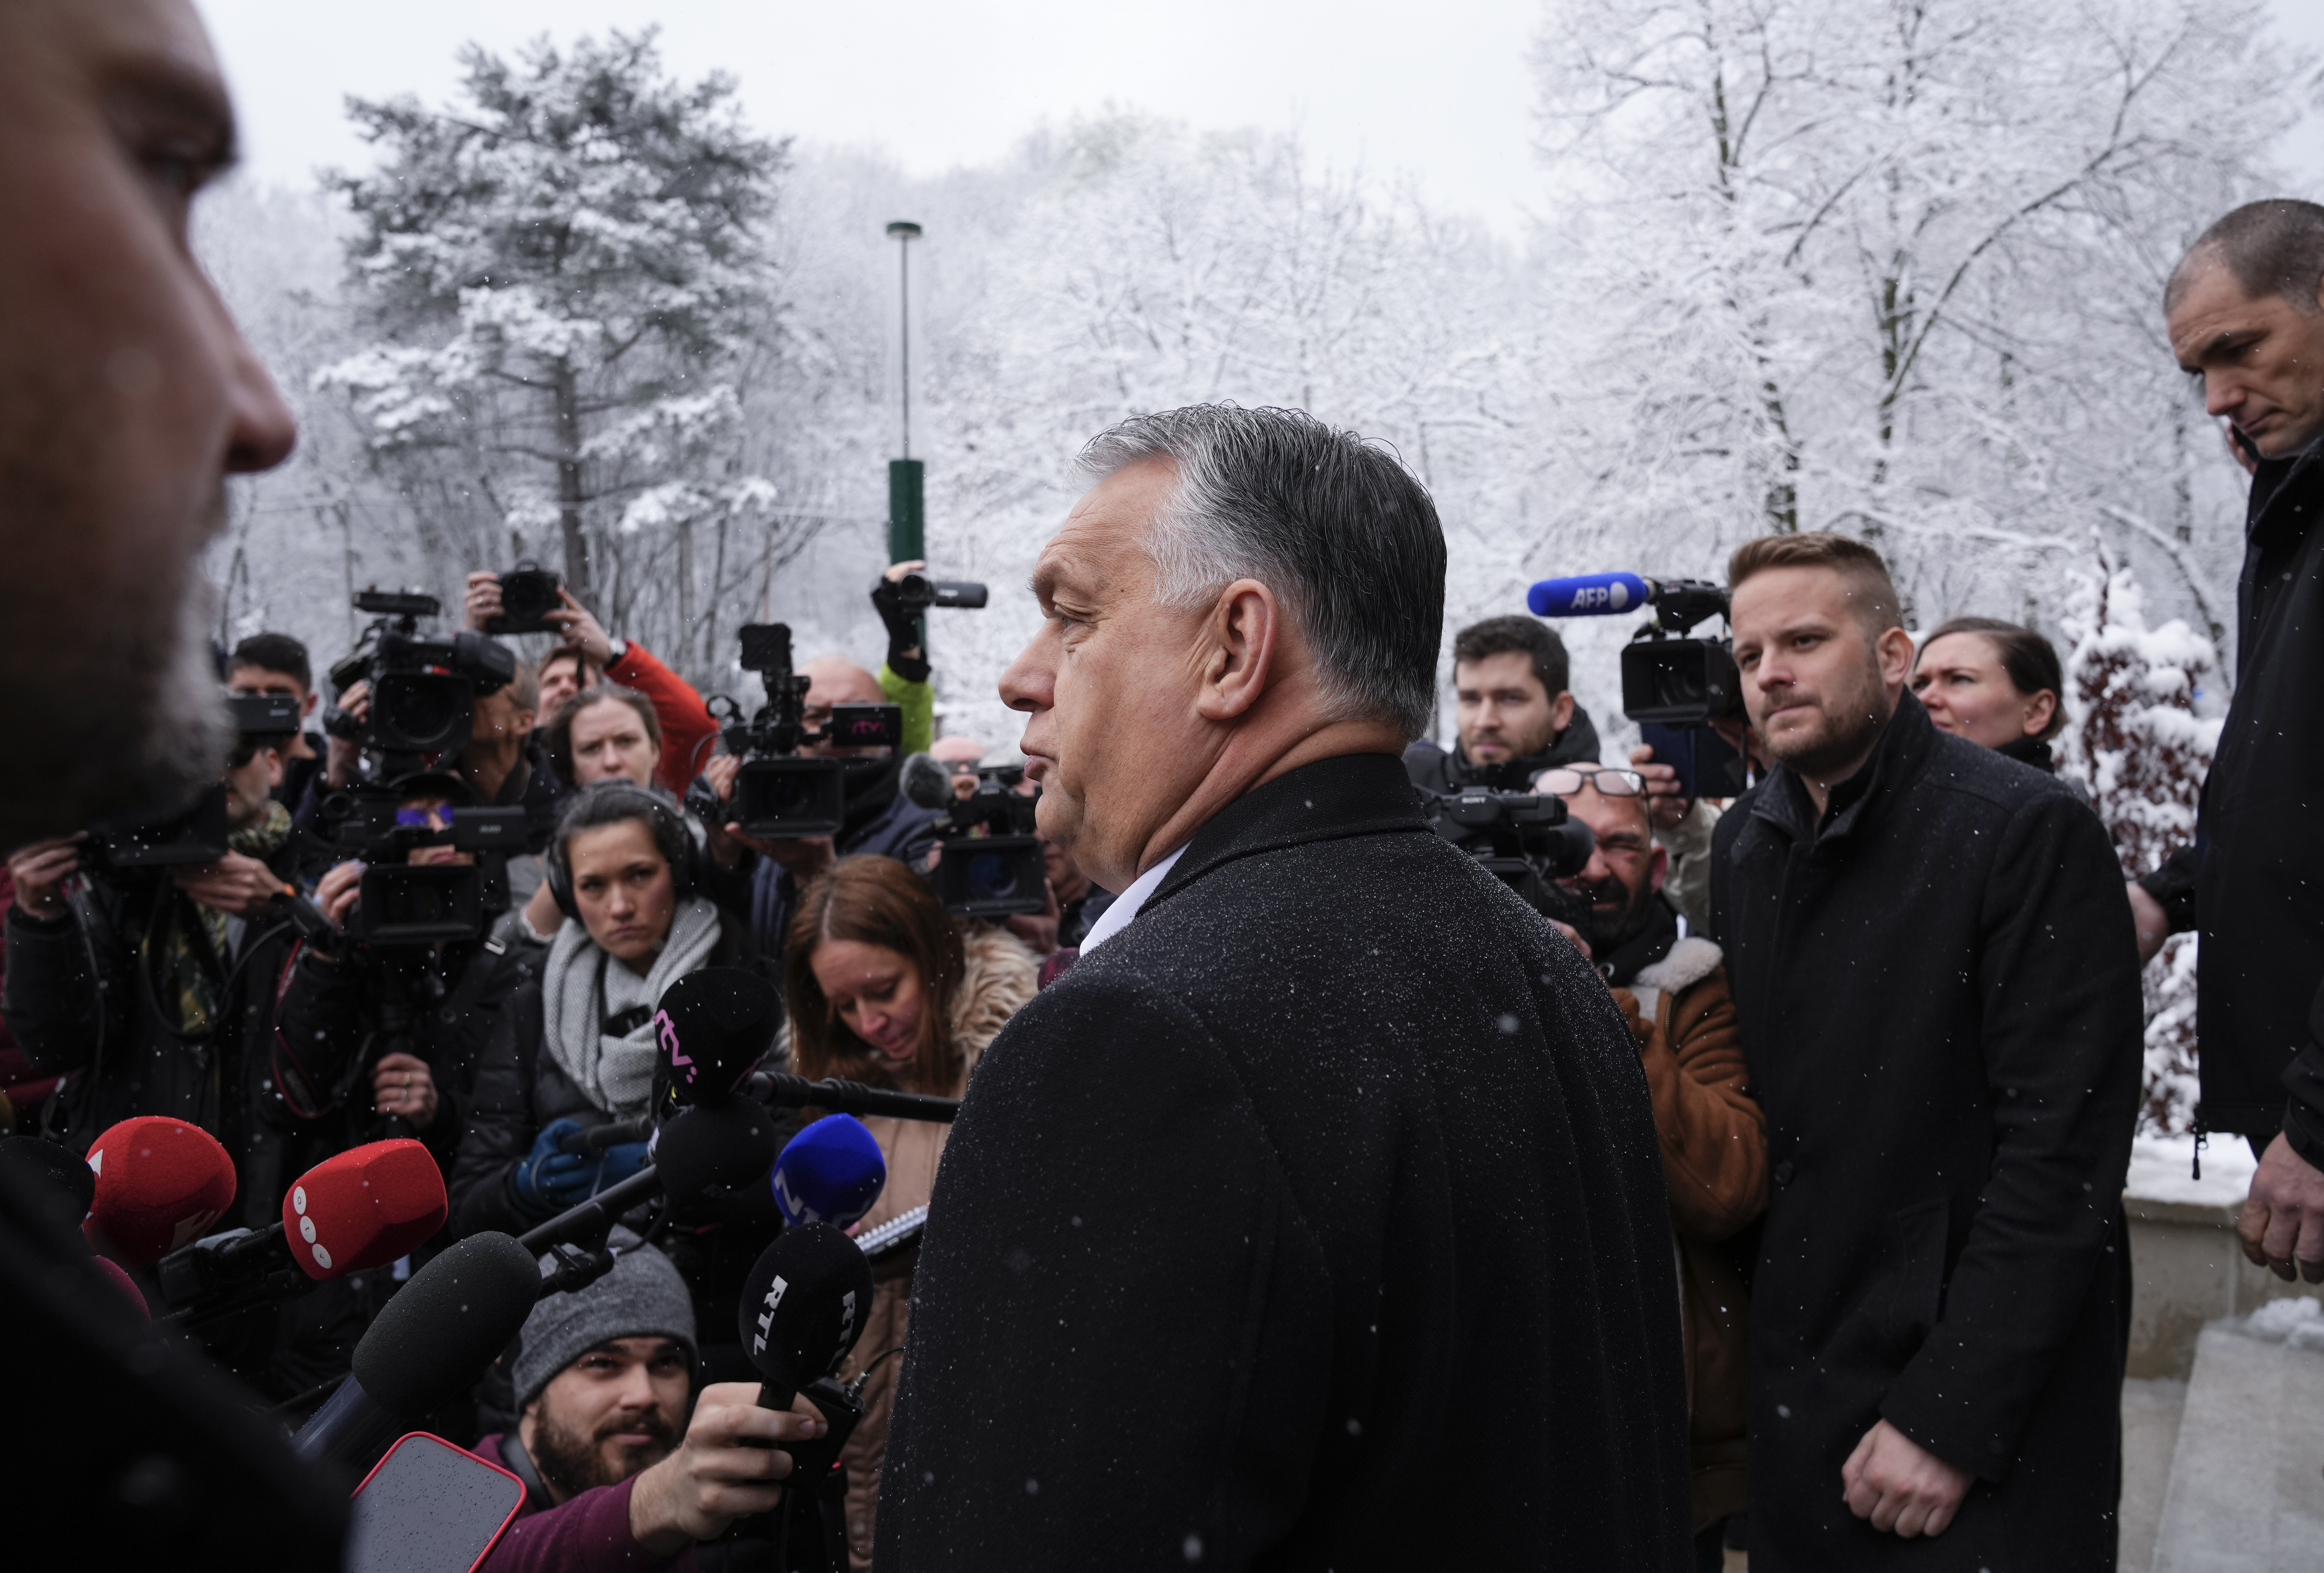 Hungary's nationalist prime minister Viktor Orban, center, talks to the media after casting his vote for general election in Budapest, Hungary